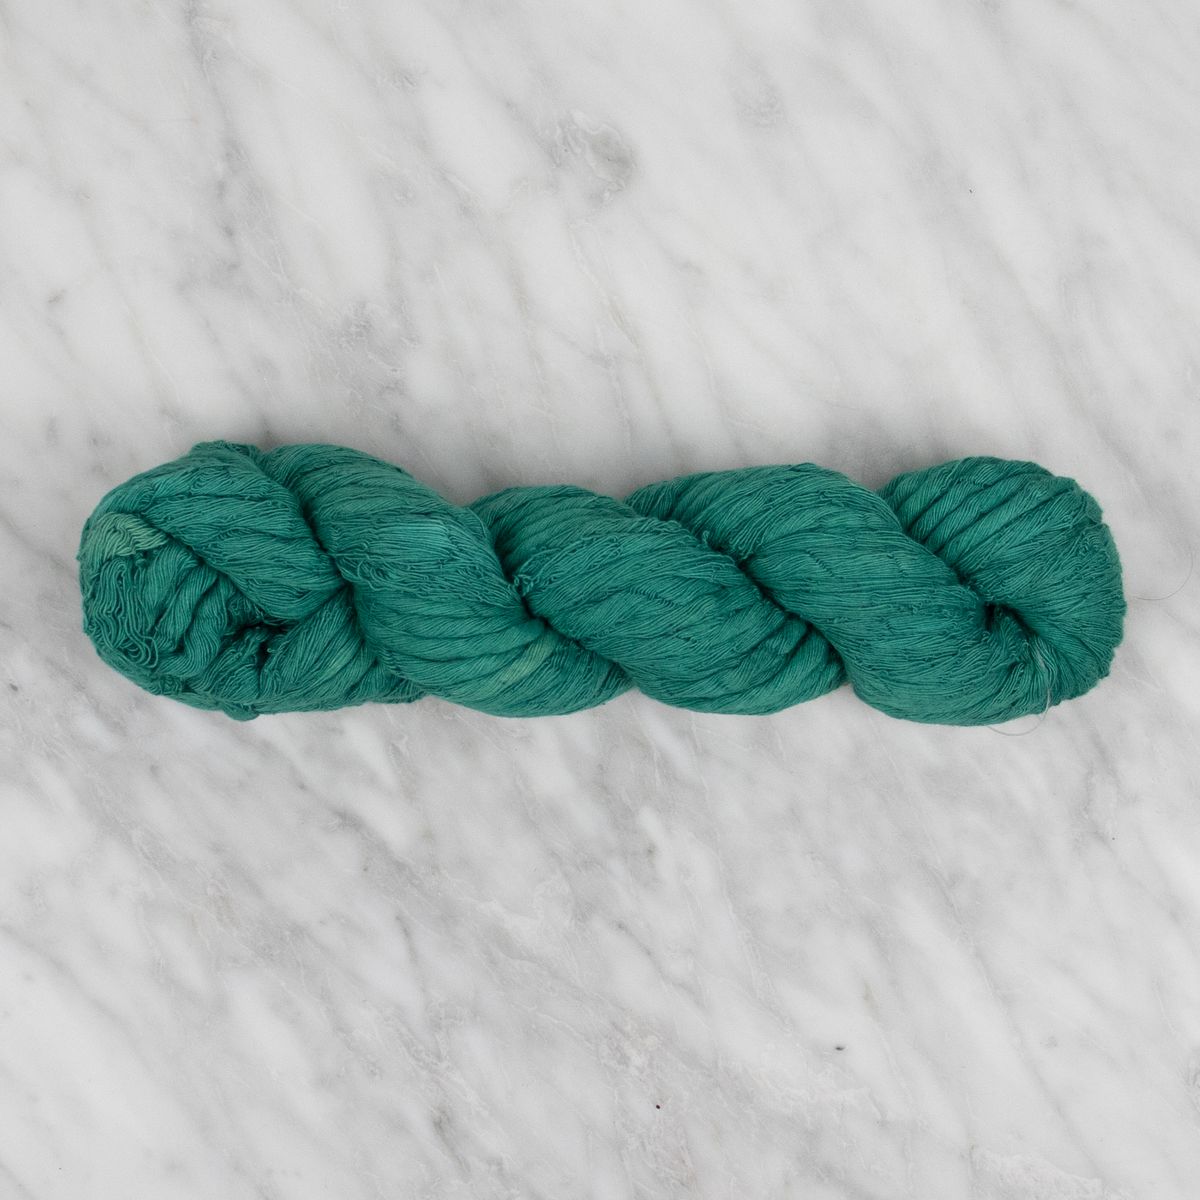 5mm Hand-Dyed Cotton String - Arcadia - 100 grams